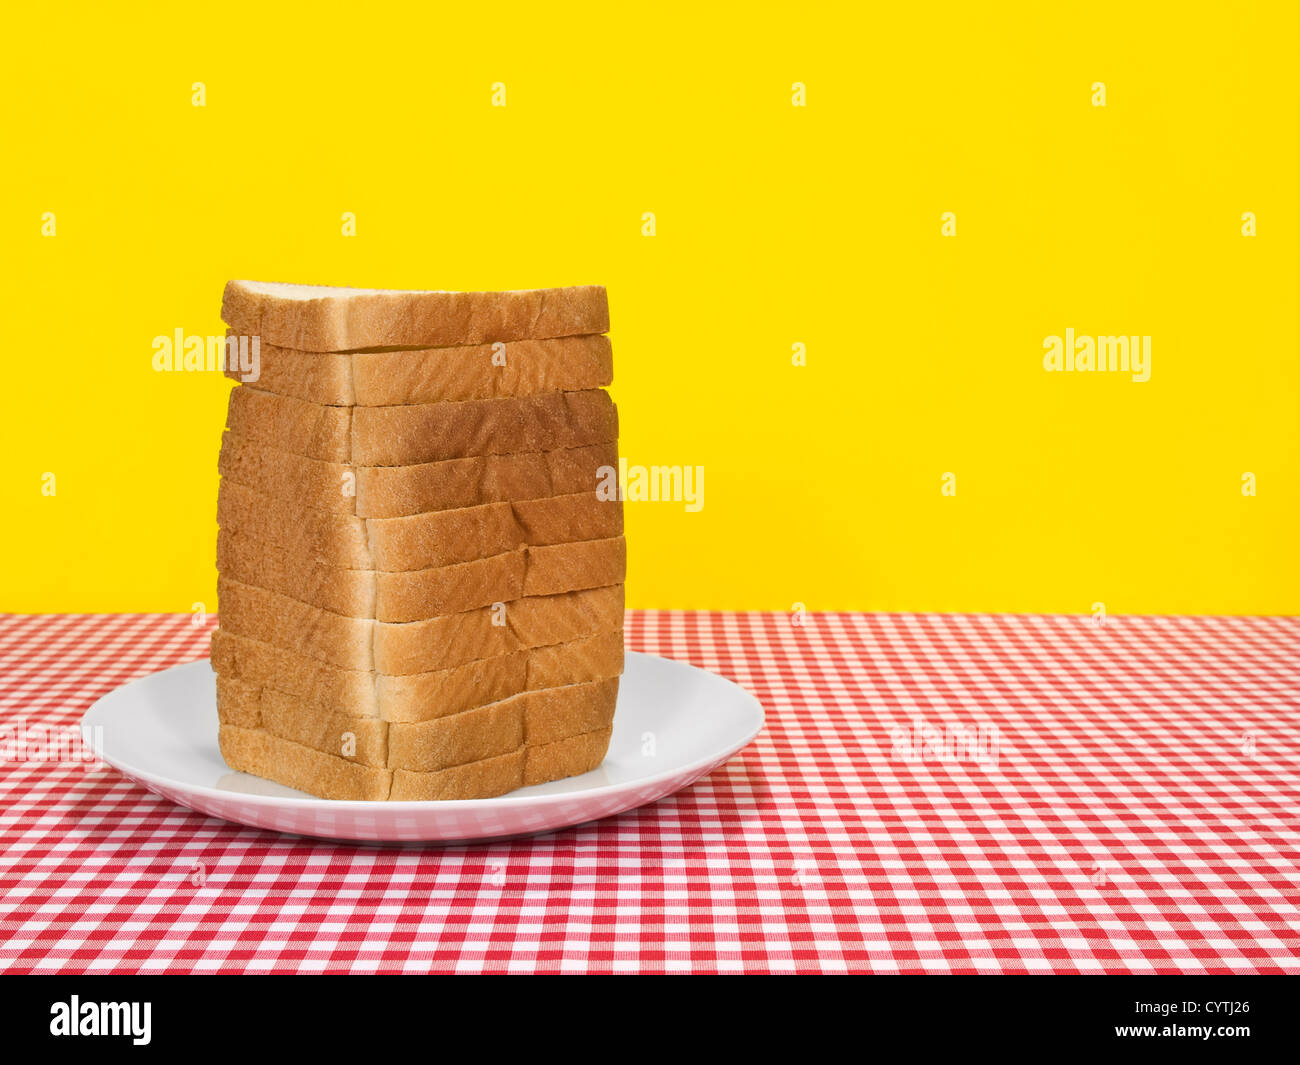 Sliced loaf of bread served on a table. Copy space on the right. Stock Photo